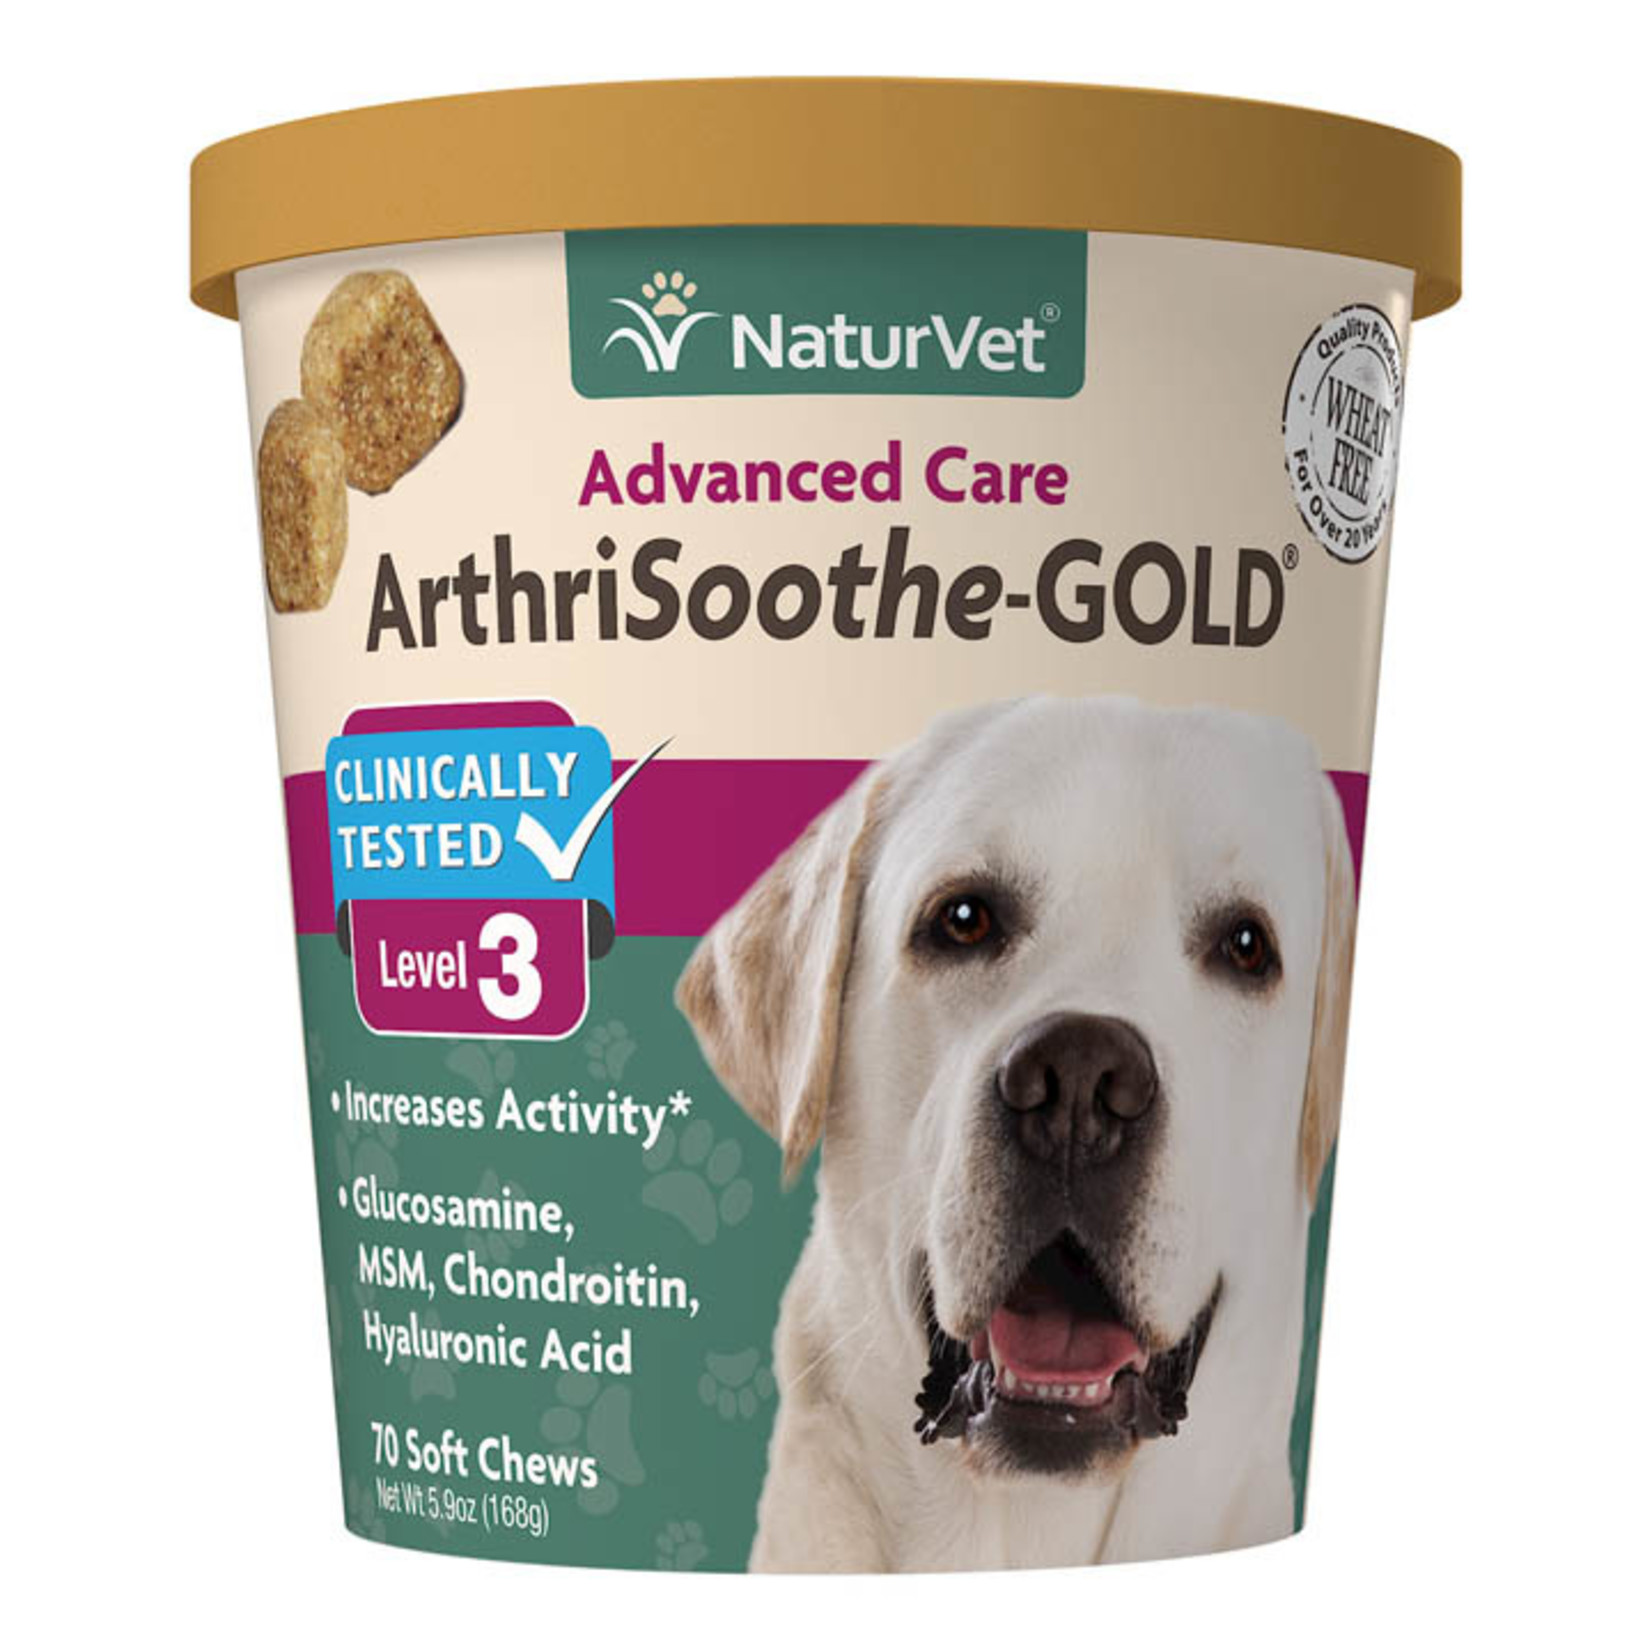 naturVet NaturVet ArthriSoothe Gold Advanced Care Level 3 Joint Health Soft Chews for Dogs and Cats - 70ct, 180ct